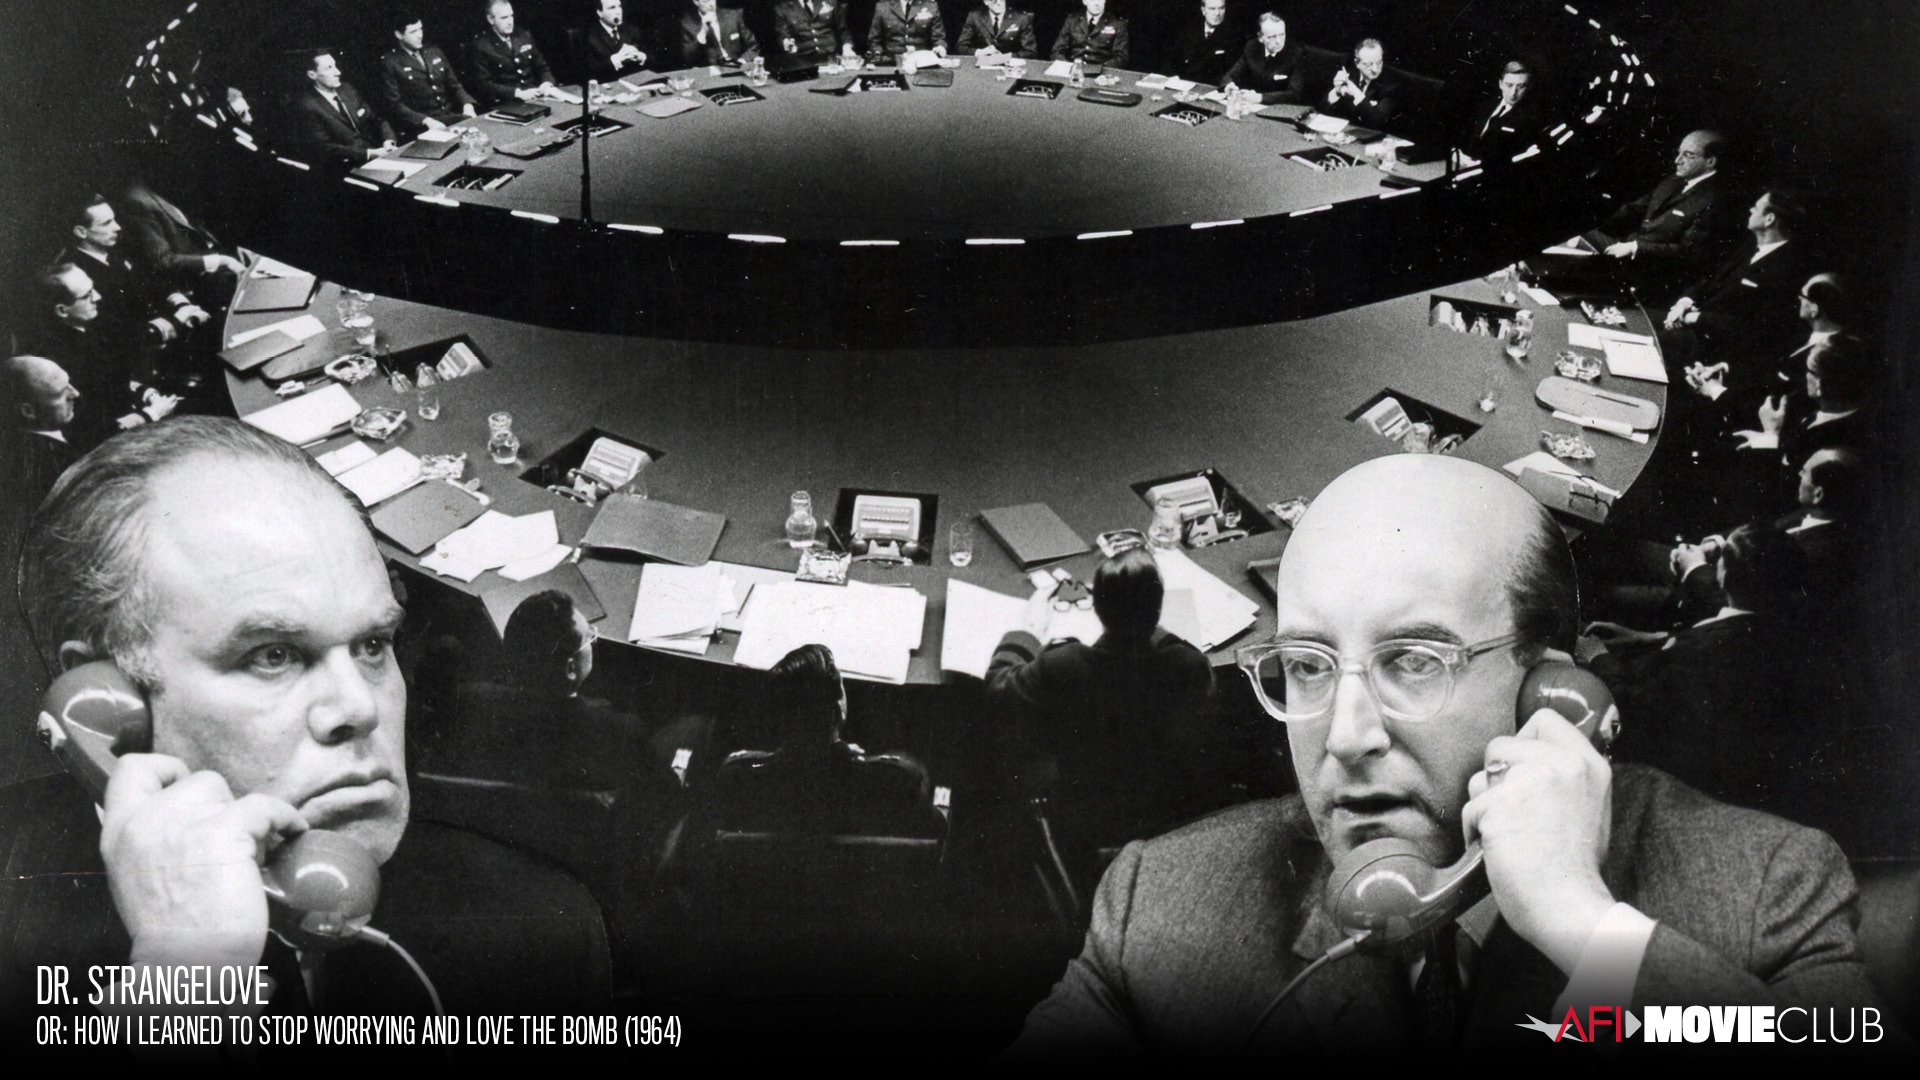 Dr. Strangelove or: How I Learned to Stop Worrying and Love the Bomb Film Still